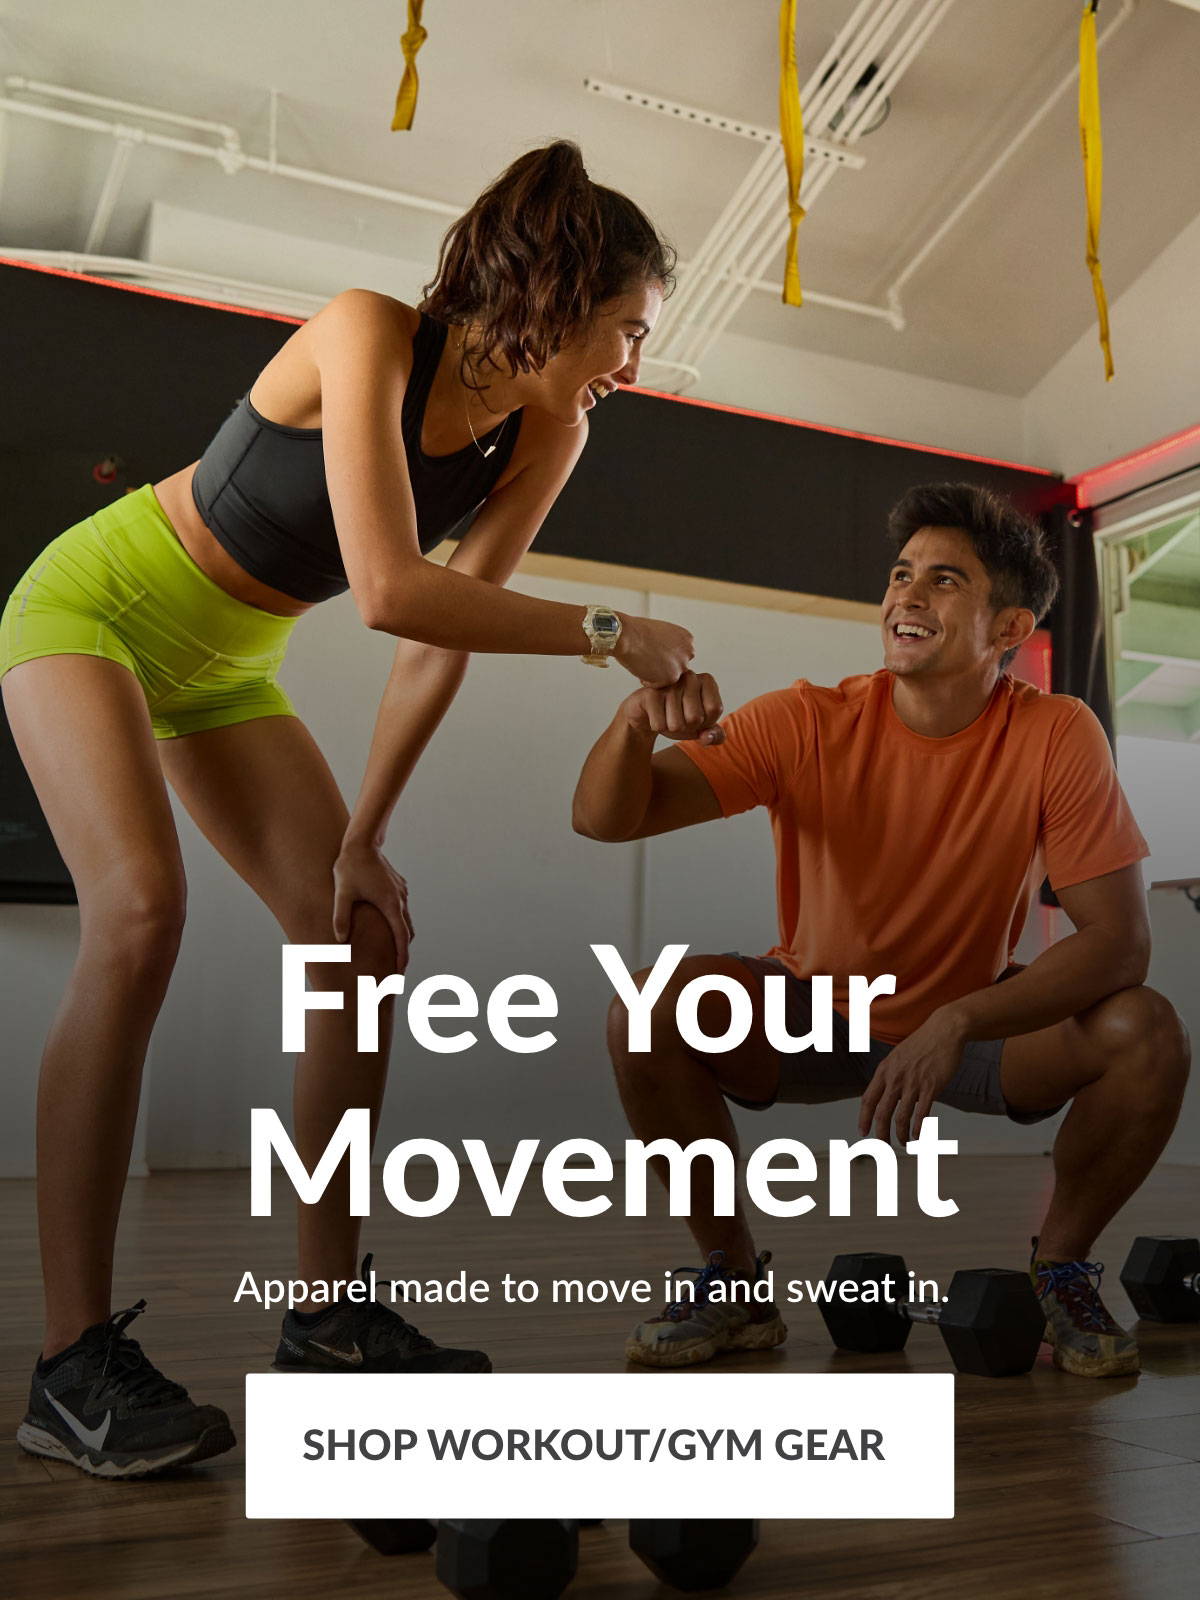 Free Your Movement - Apparel made to move in and sweat in